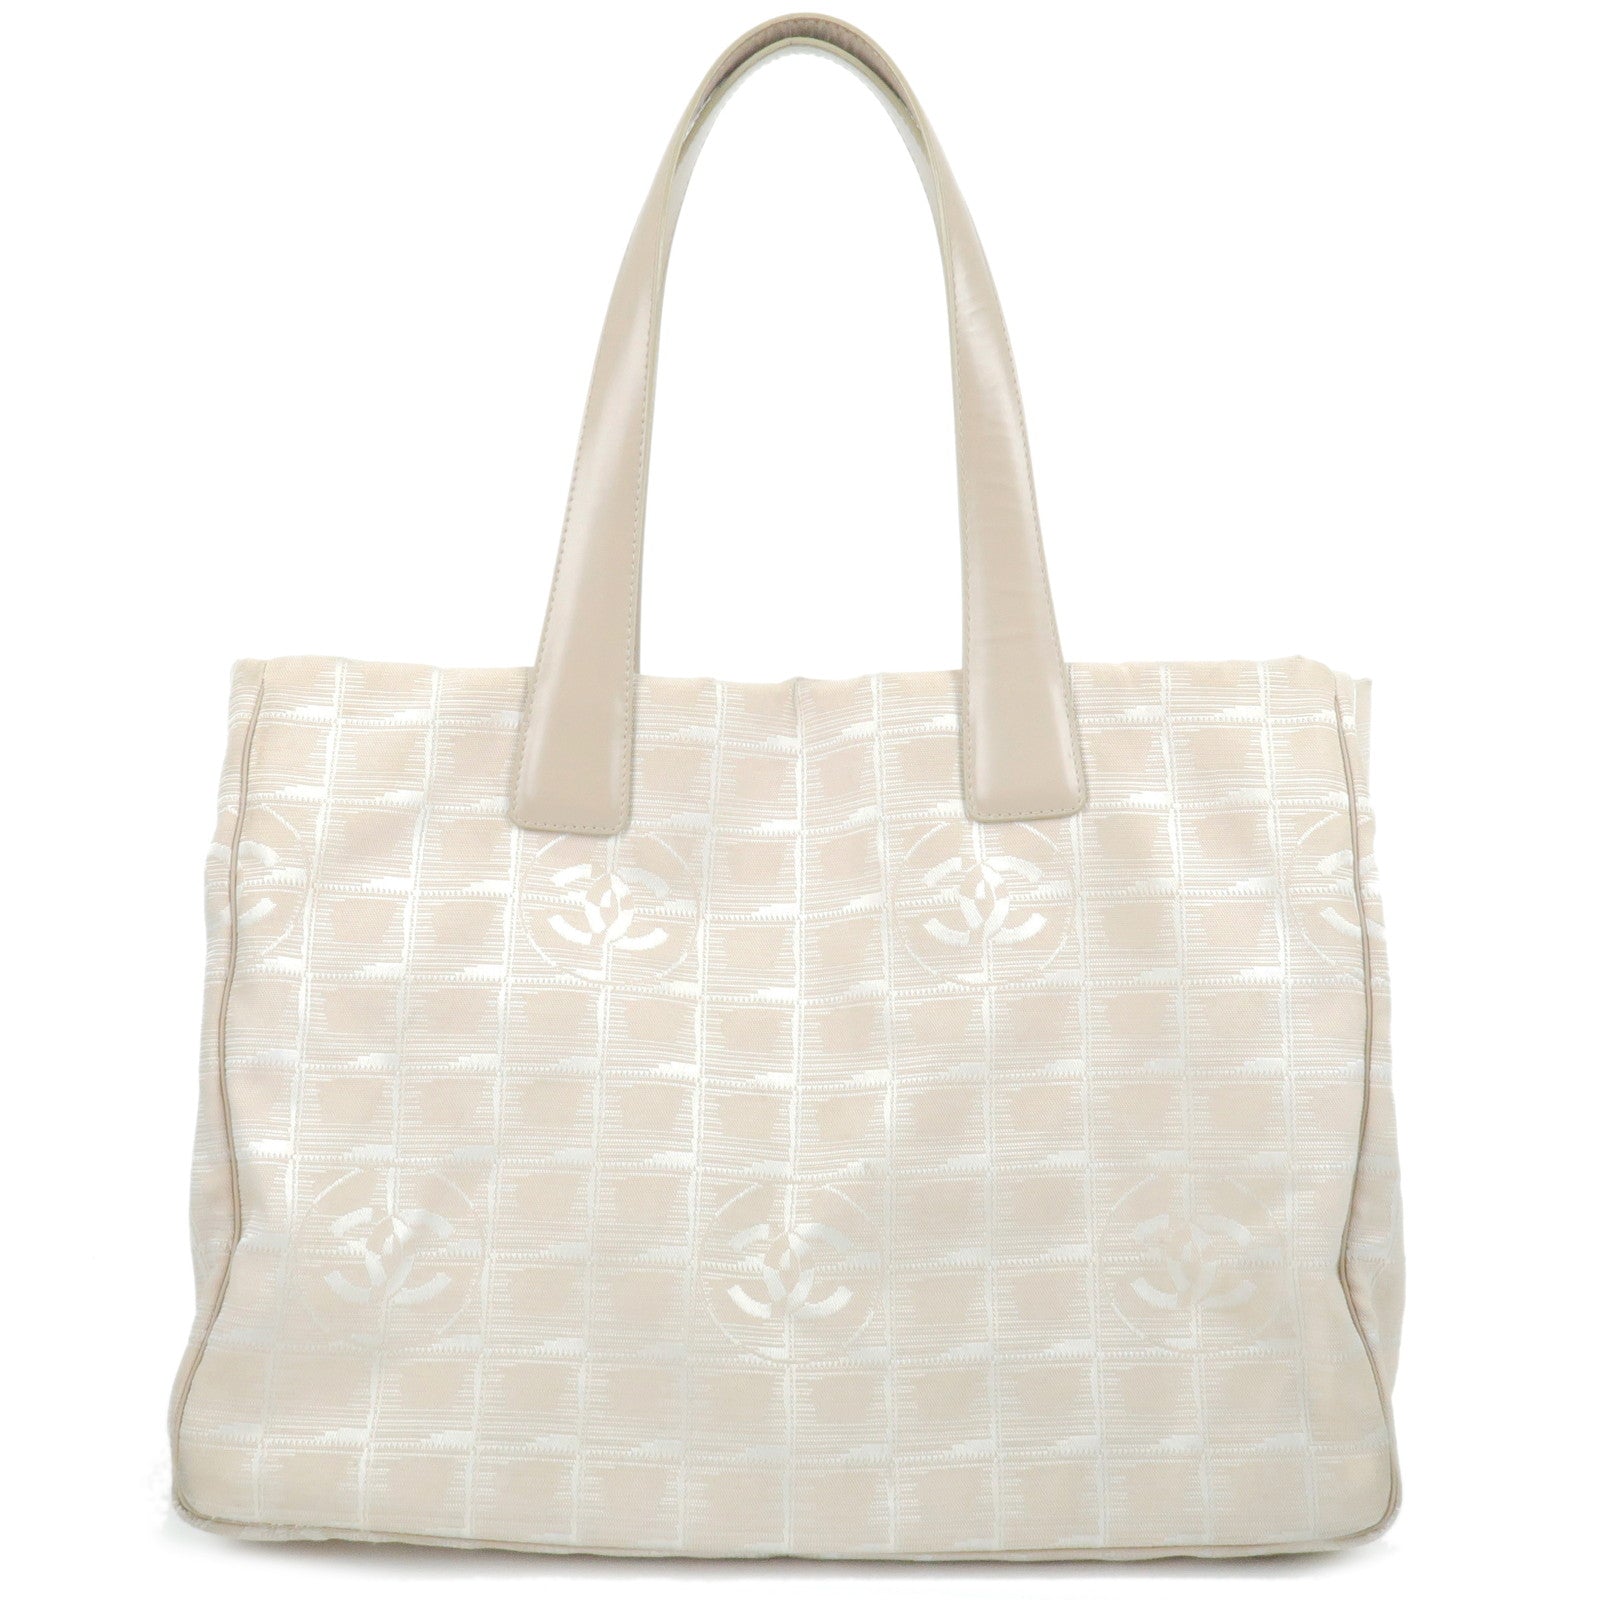 Auth-CHANEL-Travel-Line-Nylon-Jacquard-Leather-Tote-Bag-Beige